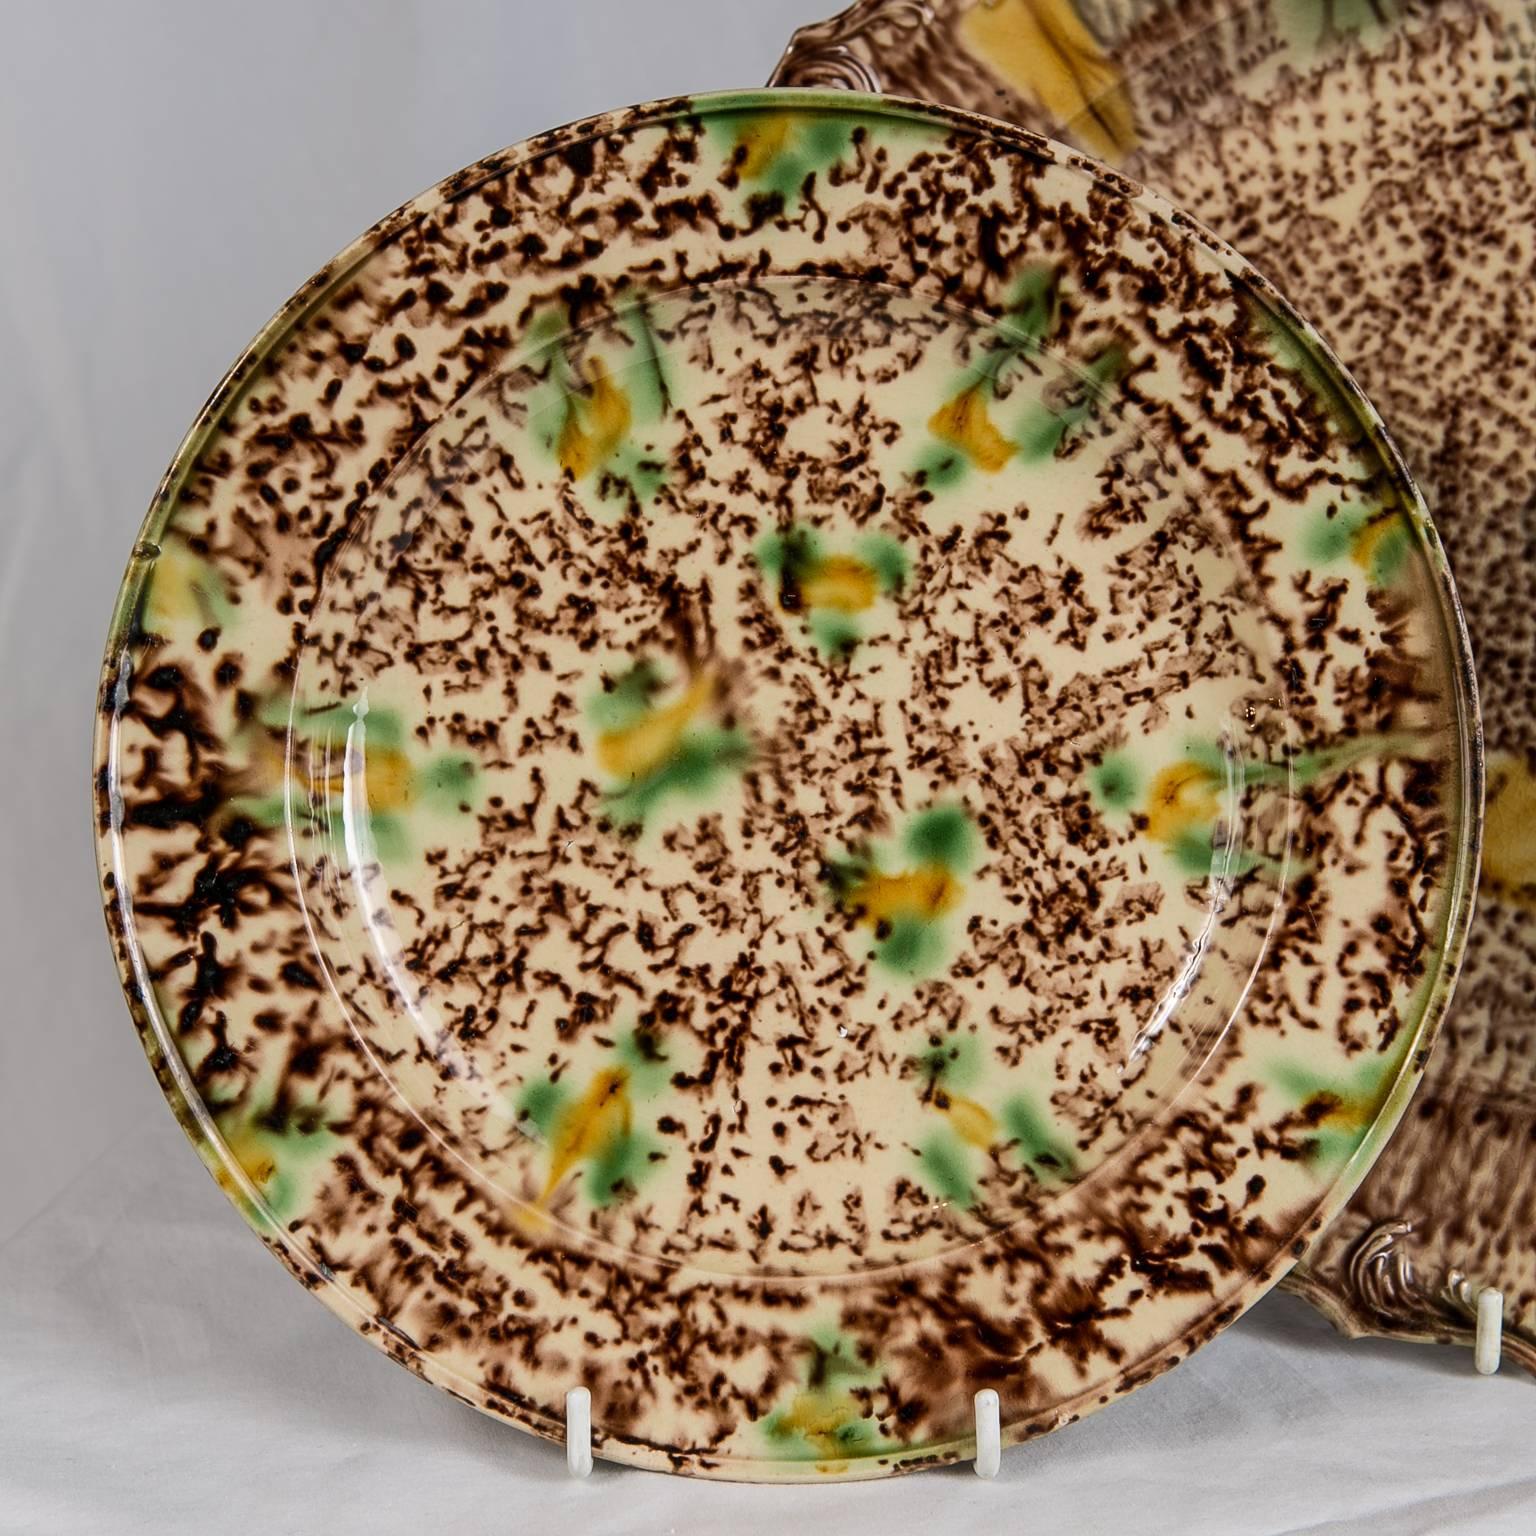 We are pleased to offer these three mid-18th century English tortoiseshell ware dishes, also known as Whieldon ware. Tortoiseshell ware is 18th century creamware that is decorated under the glaze by painting or sponging with metallic oxides. During